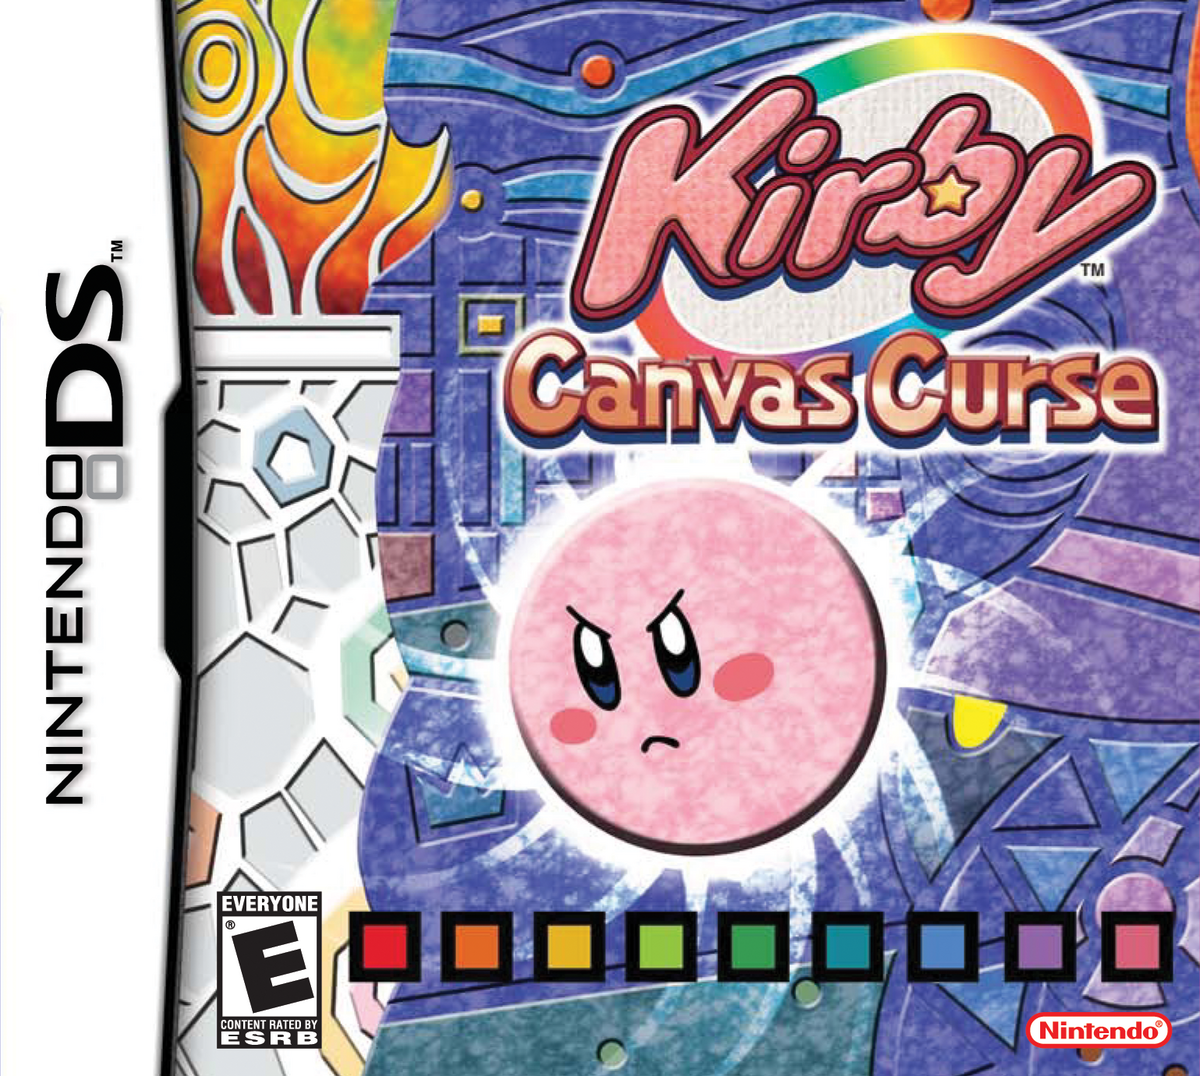 kirby-canvas-curse-strategywiki-strategy-guide-and-game-reference-wiki